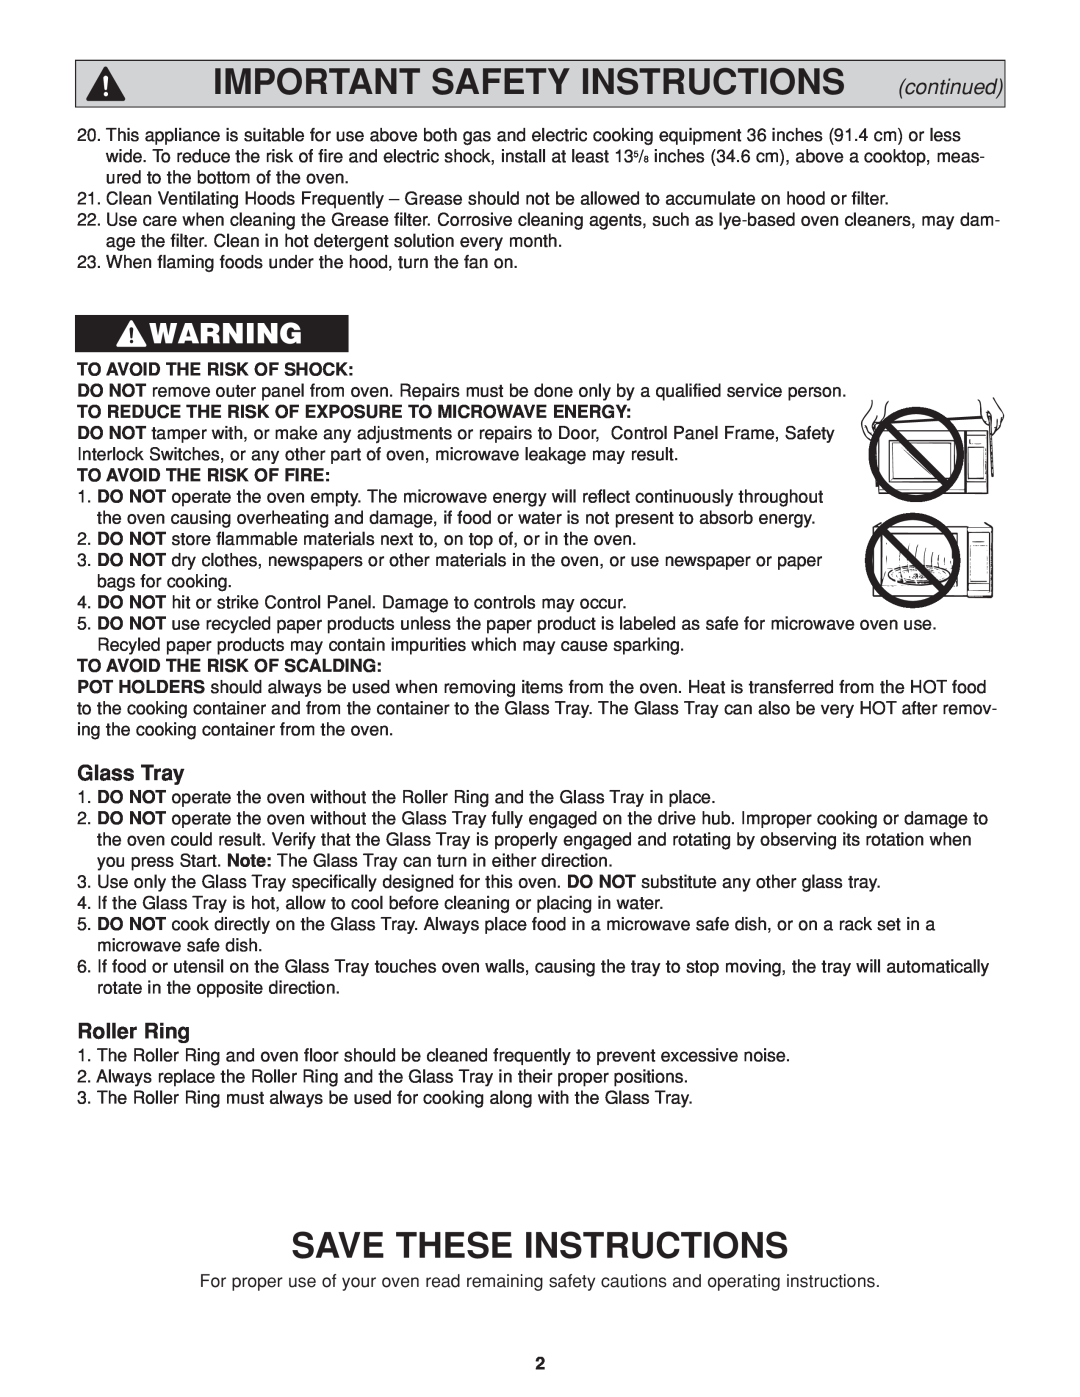 Panasonic NN-H264 IMPORTANT SAFETY INSTRUCTIONS continued, Save These Instructions, Glass Tray, Roller Ring 